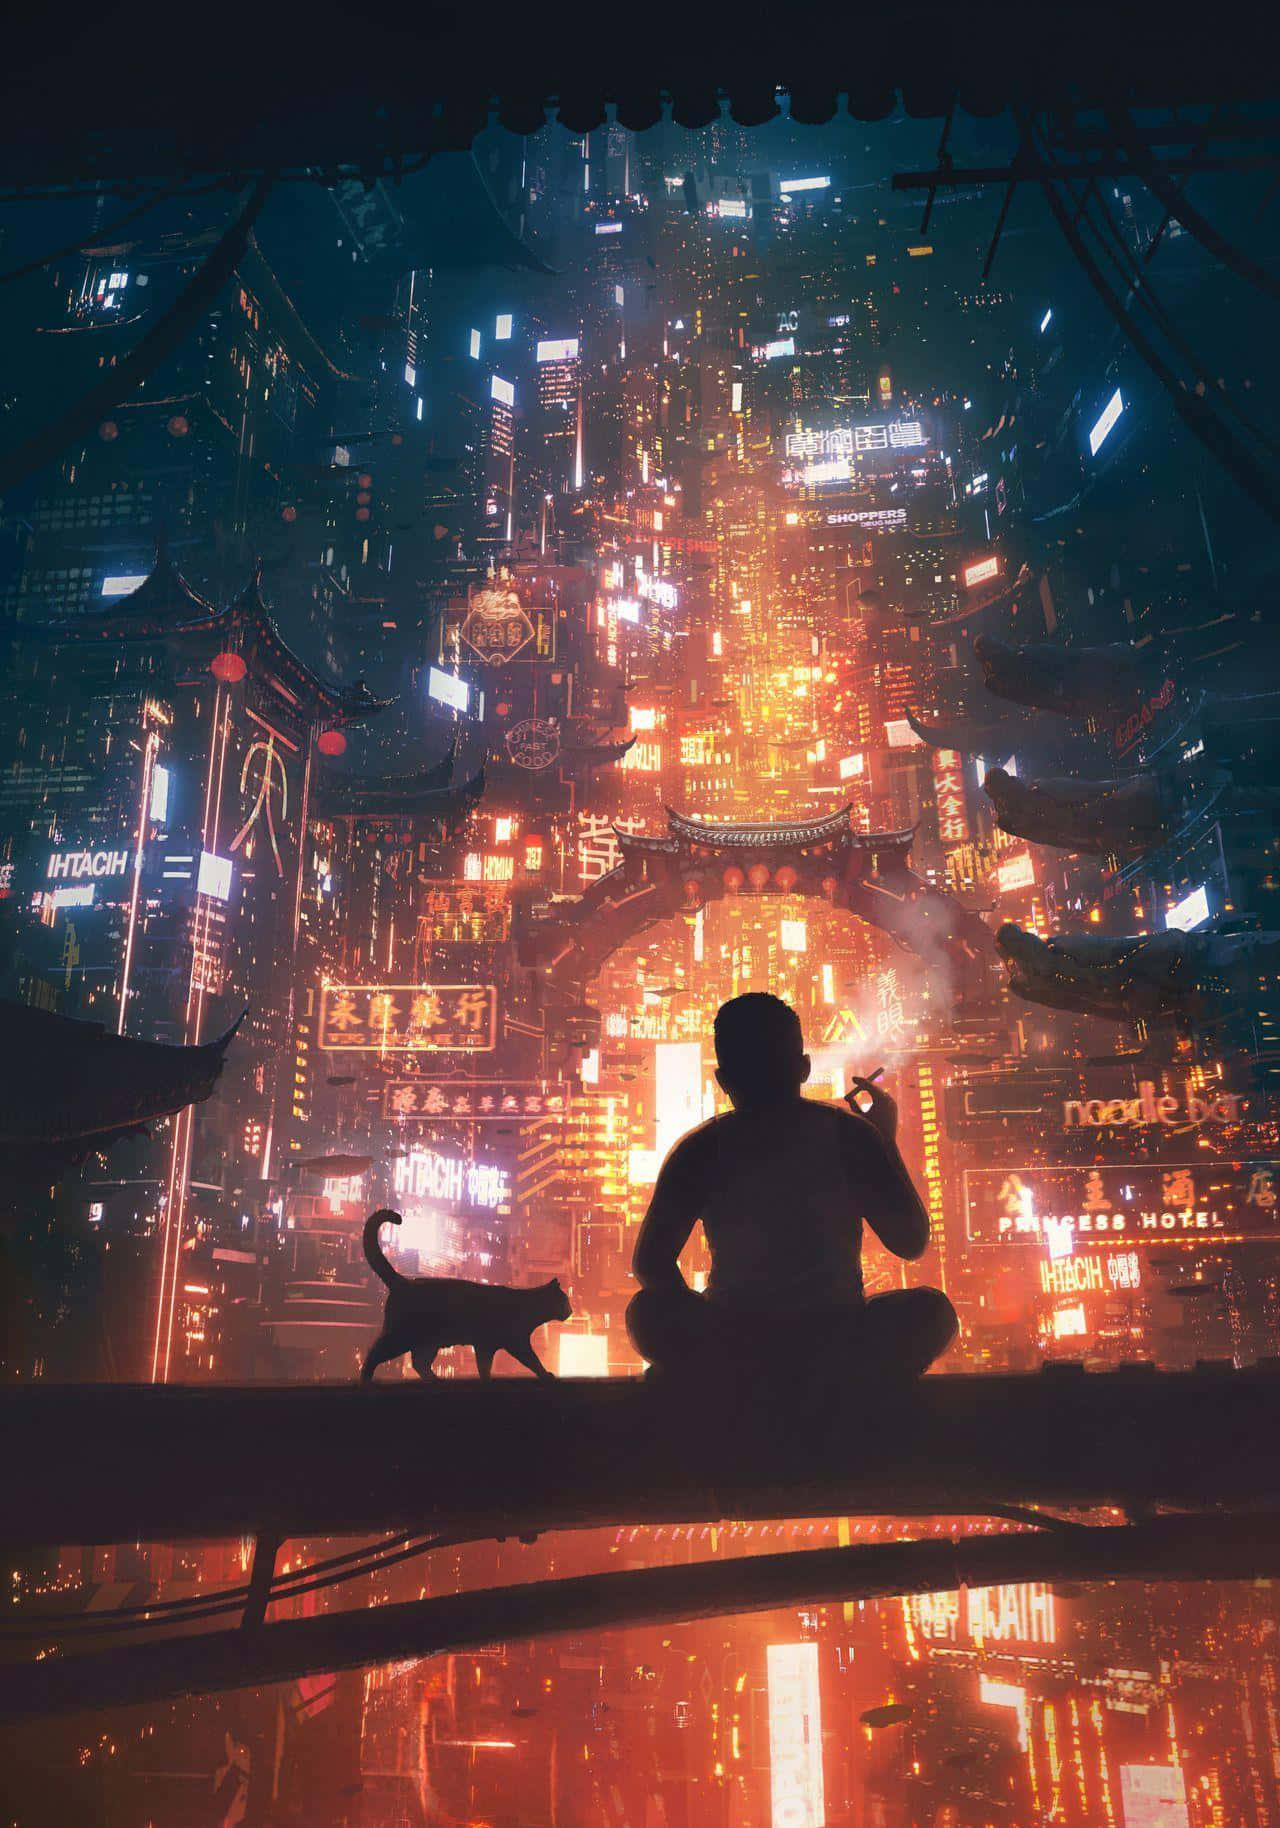 Cyberpunk Cityscape With Figure And Cat.jpg Wallpaper